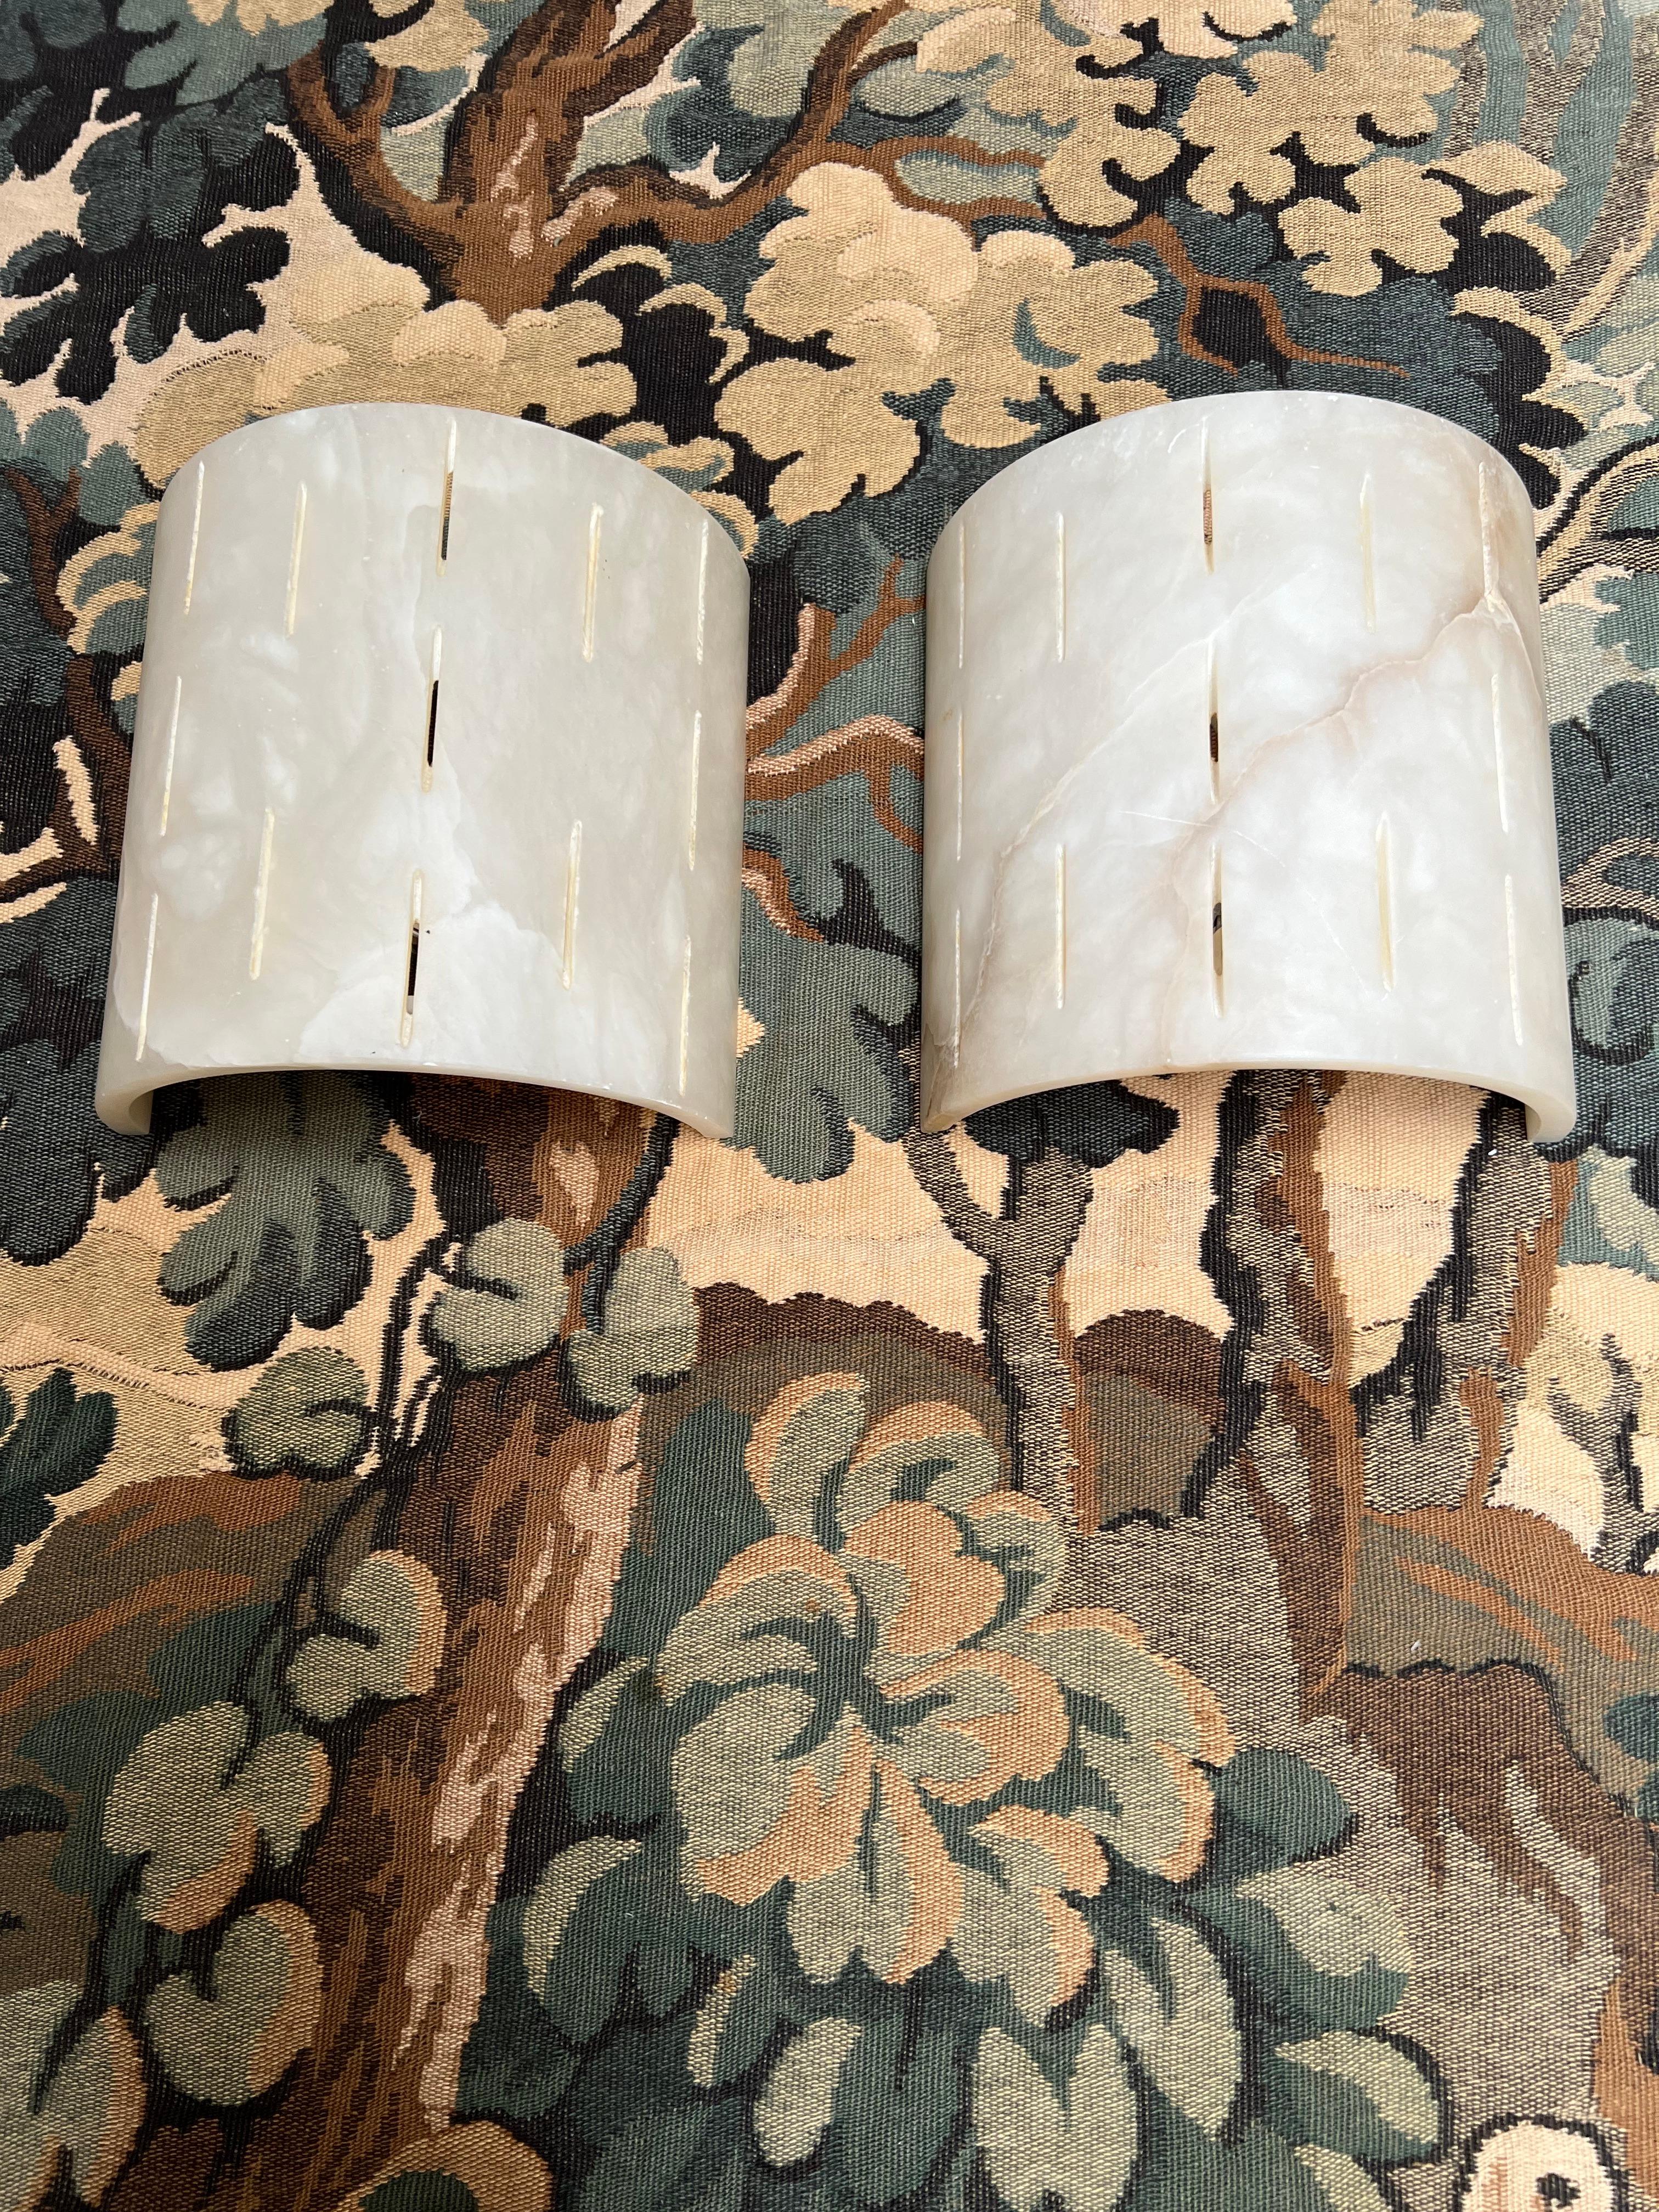 Timeless Design Pair of Art Deco Style Alabaster Wall Sconces / Light Fixtures For Sale 3